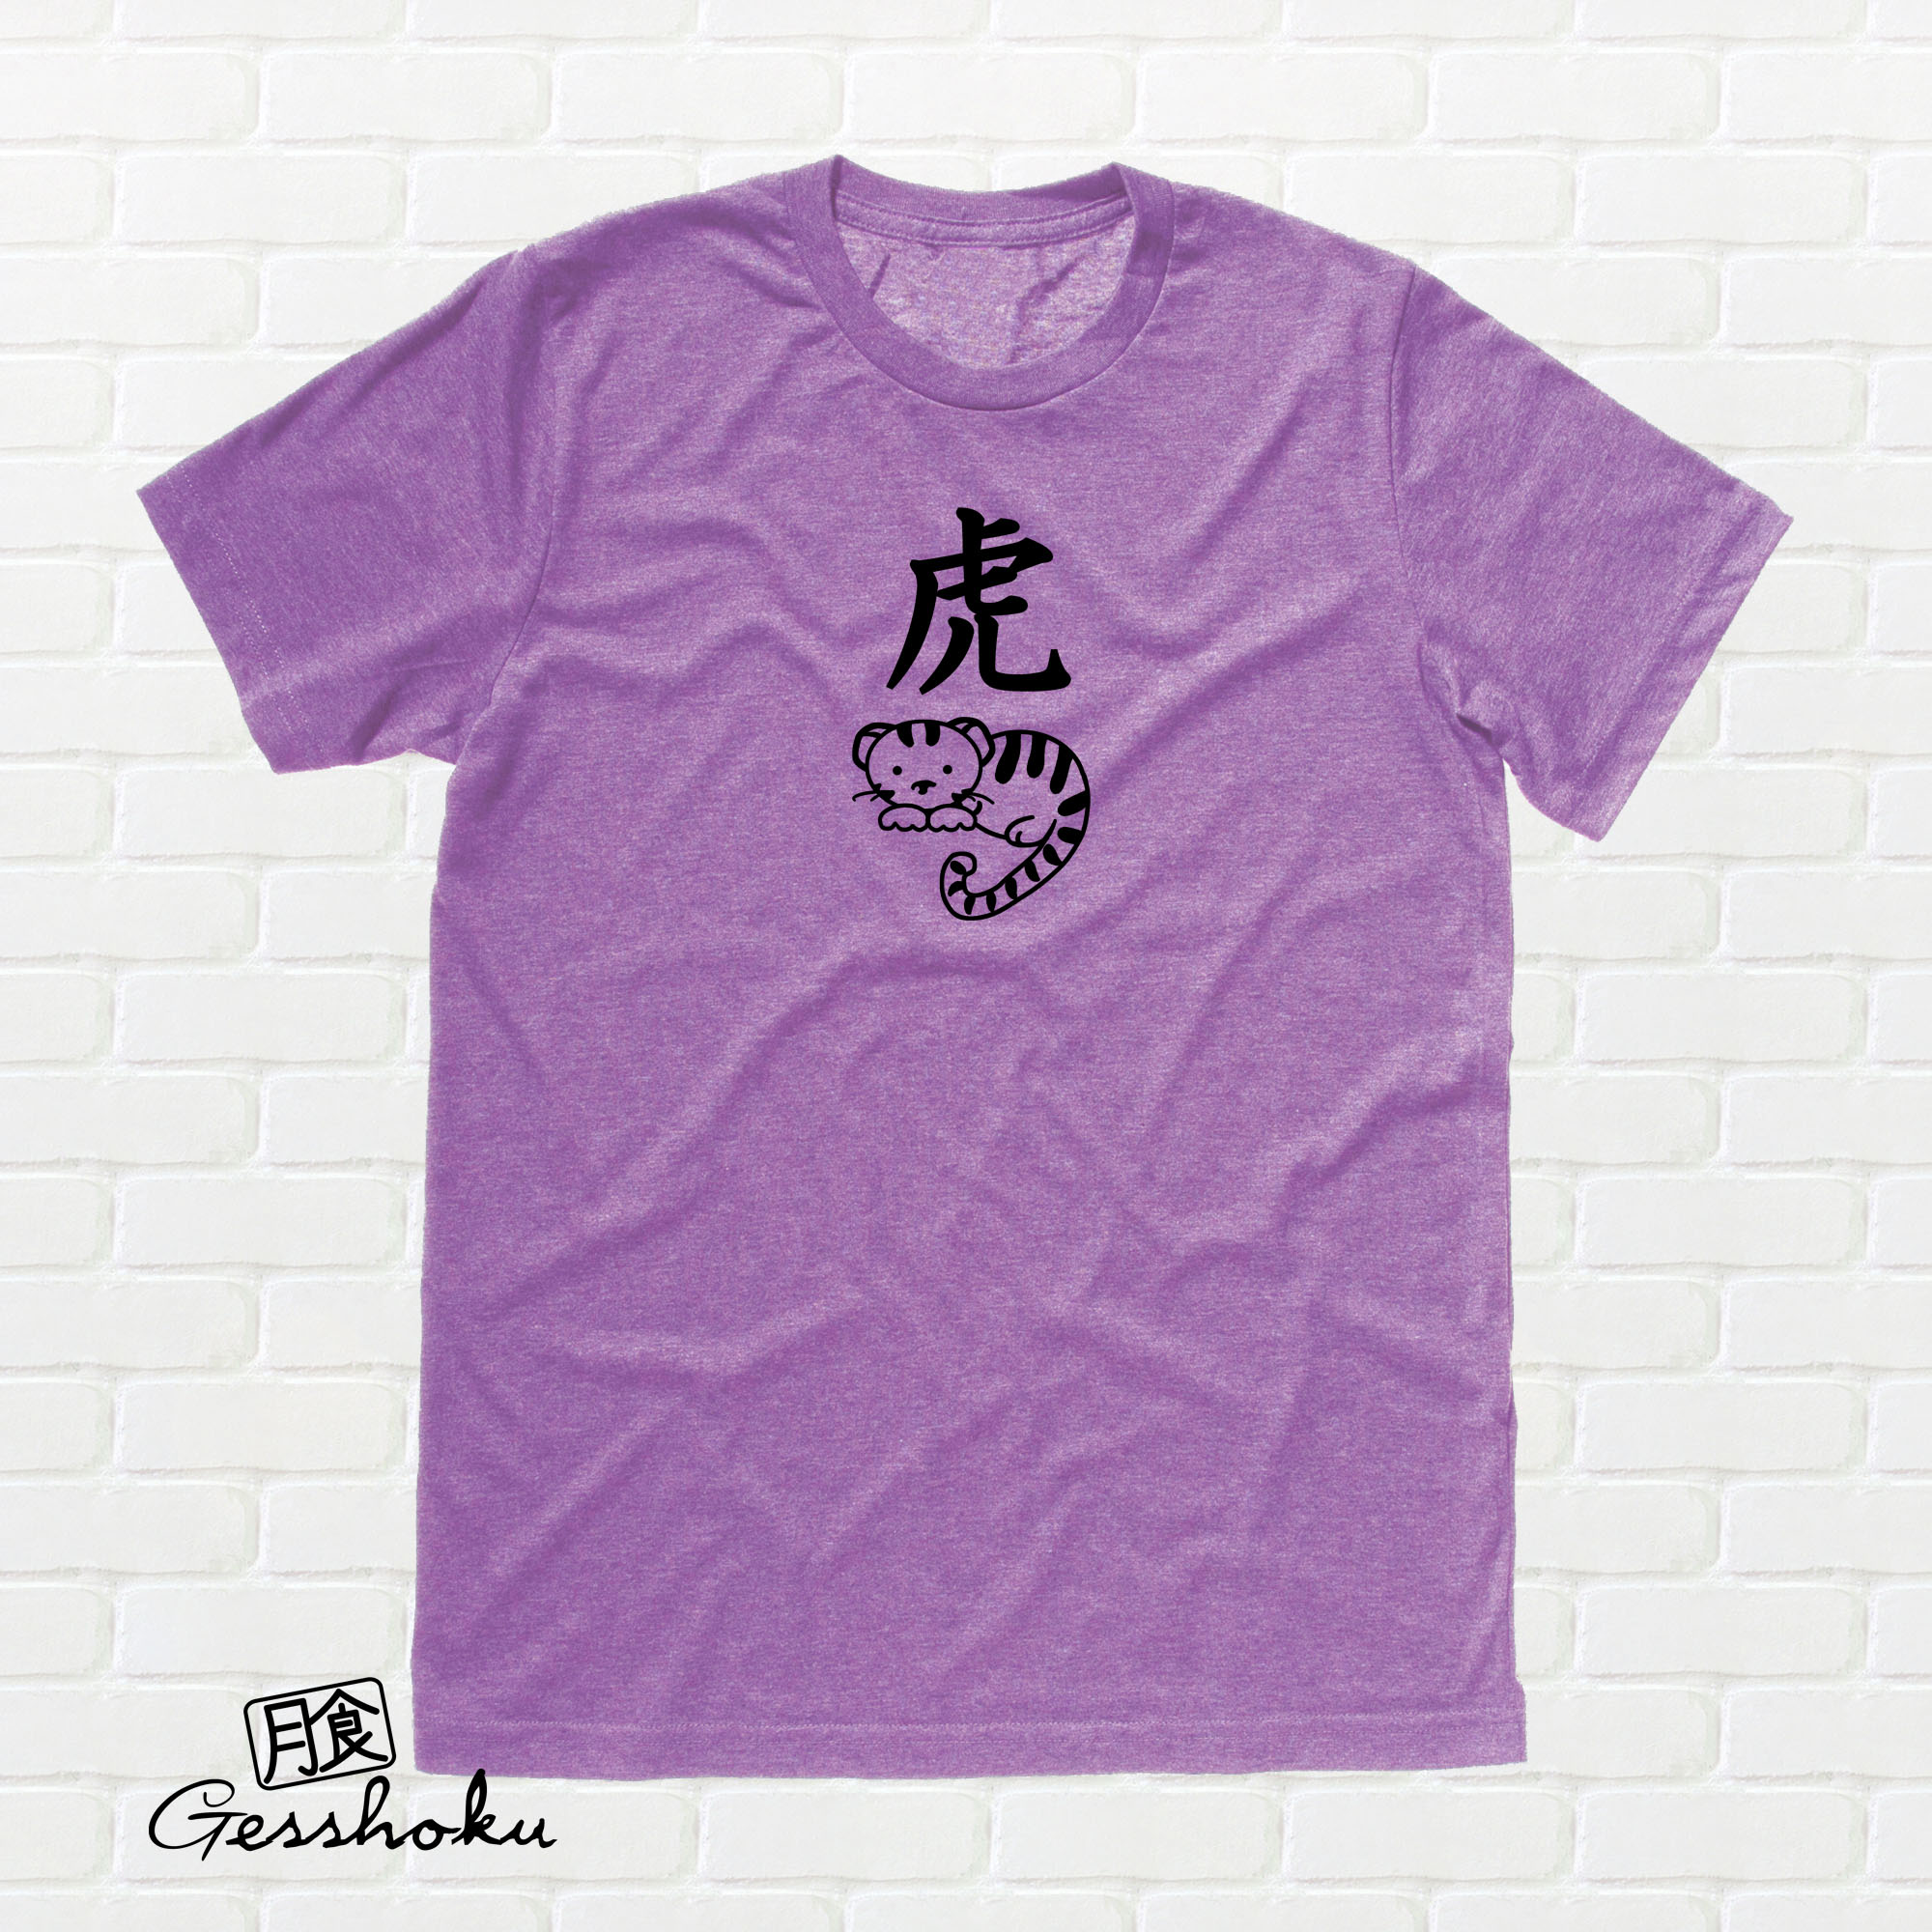 Year of the Tiger Chinese Zodiac T-shirt - Purple Berry